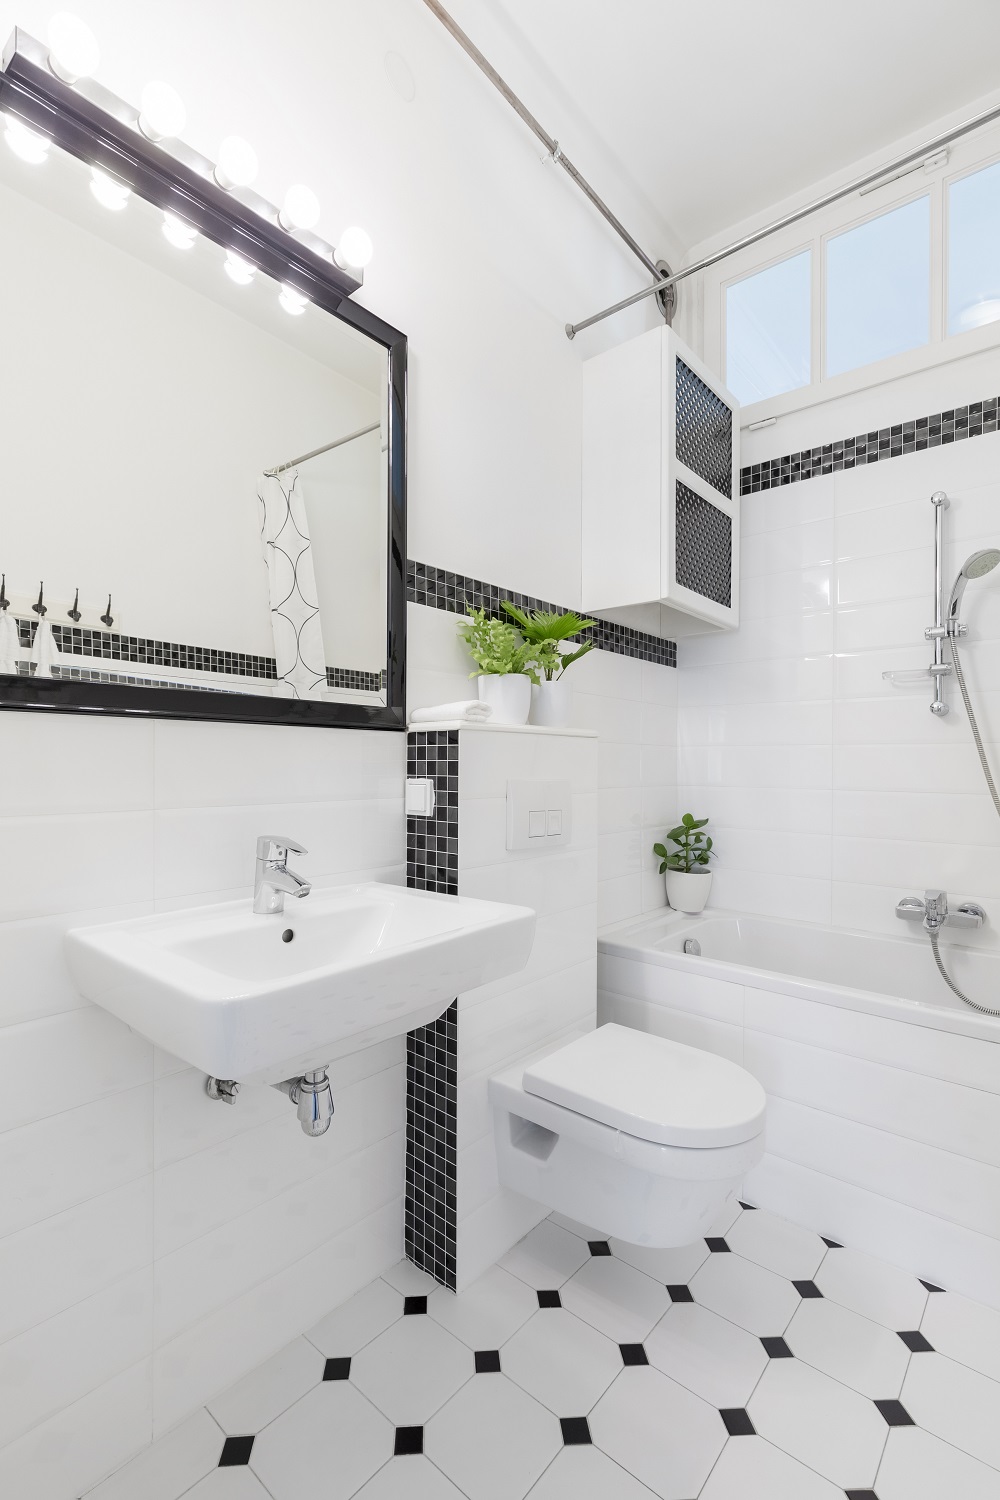 Lifestyle image of a small black and white bathroom, with black and white floortiles, black and grey mosaic detailing the white tile walls